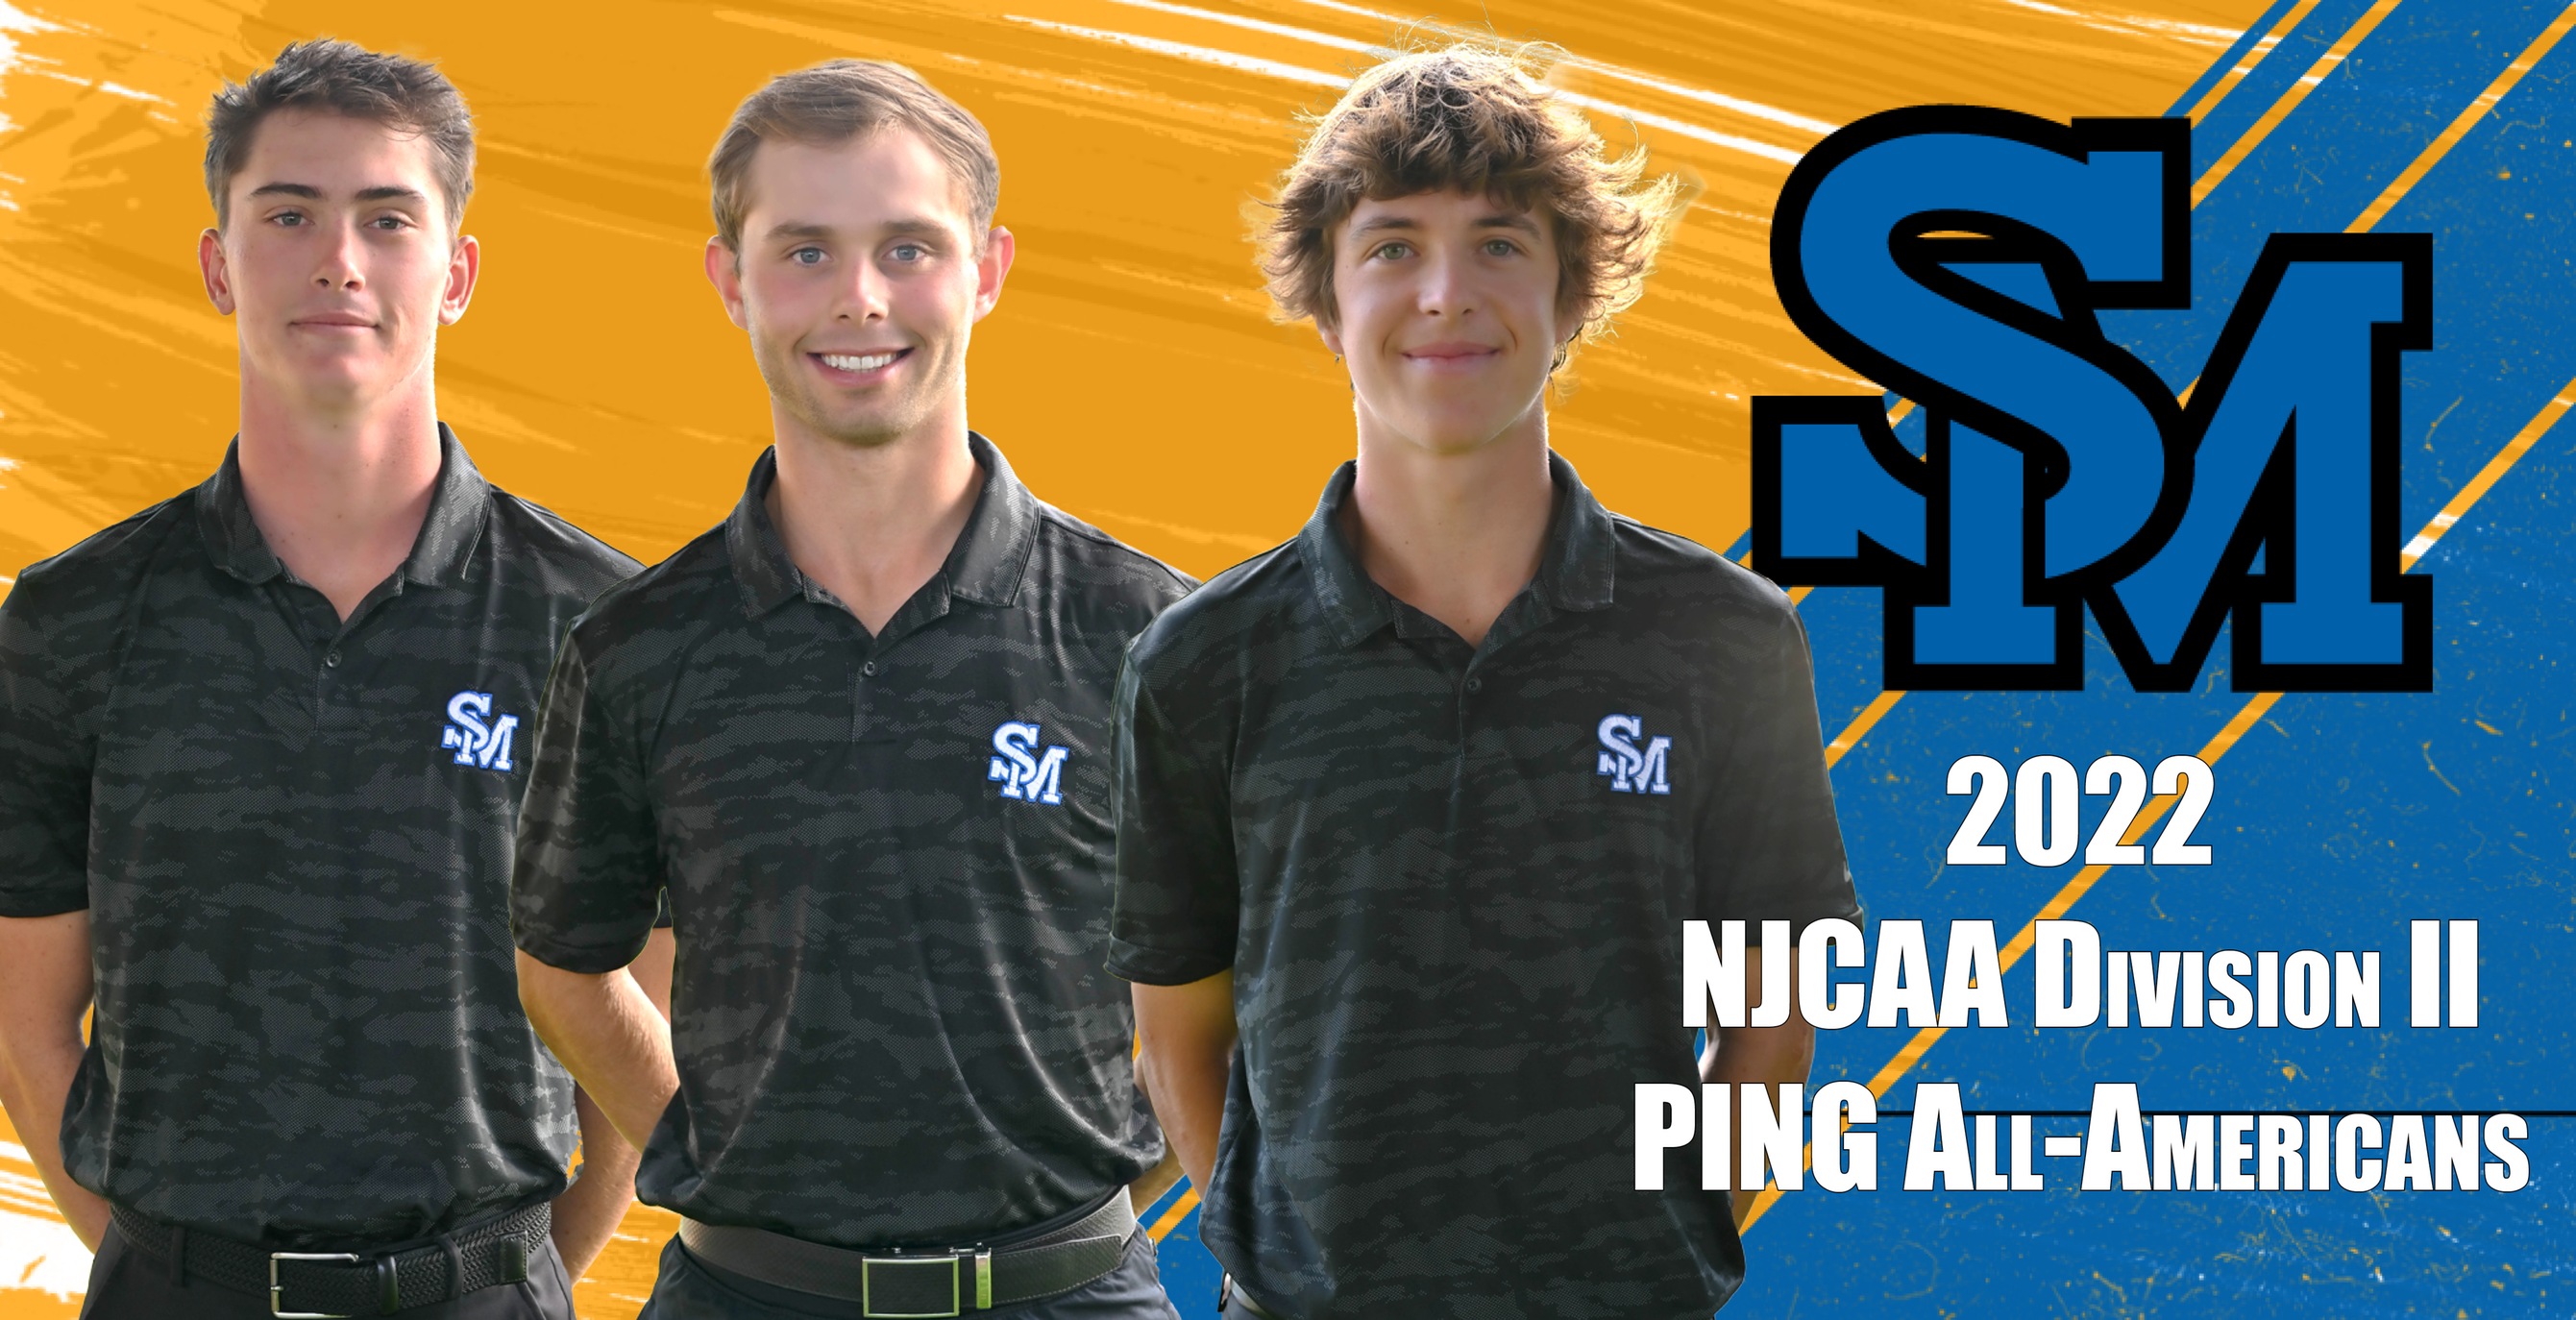 Trio of Cougars Earn NJCAA Division II PING All-American Honors